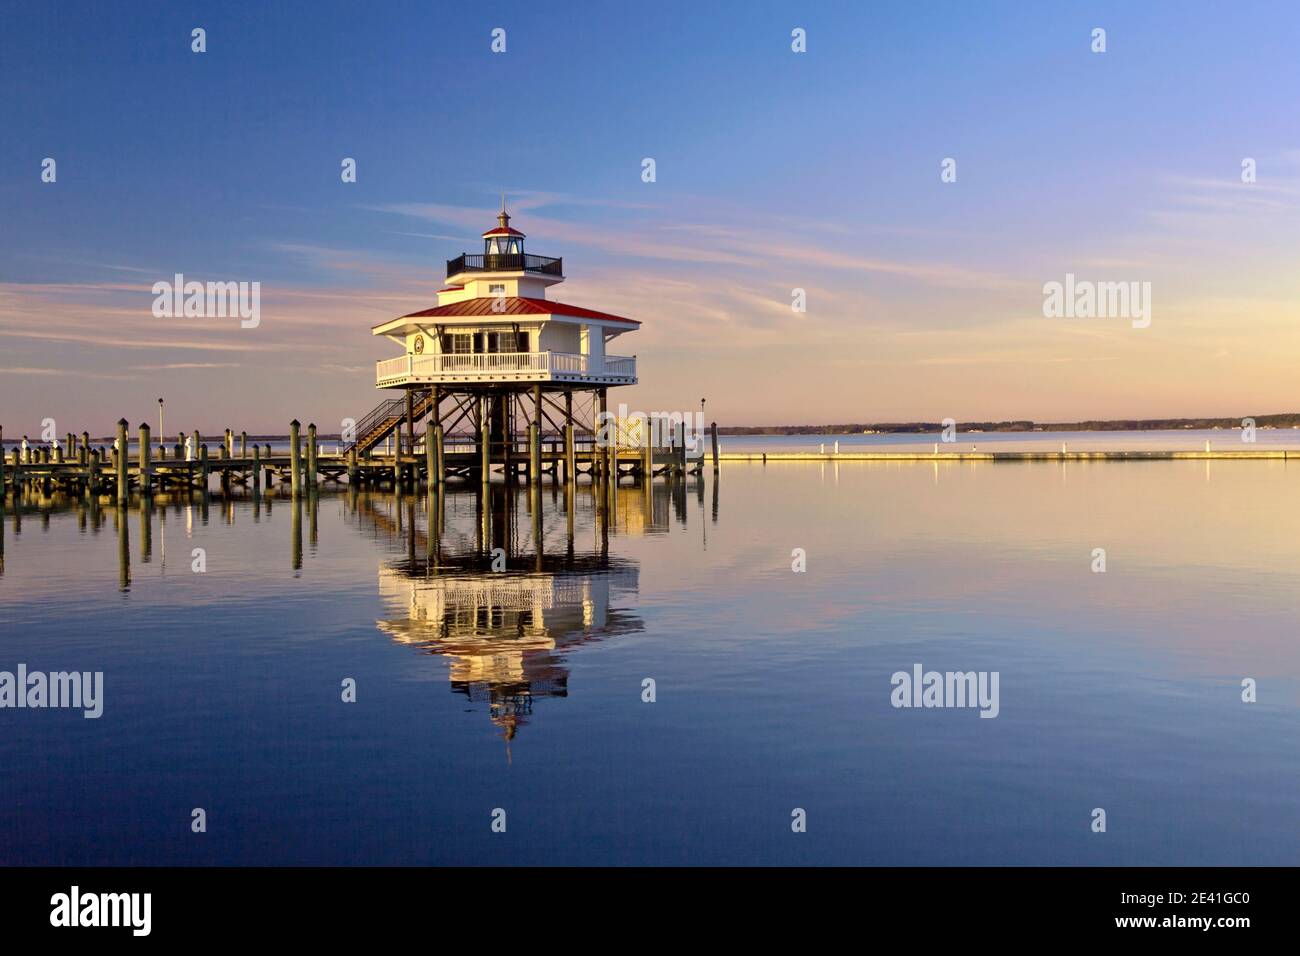 A replica of the second Choptank River Lighthouse, screw-pile lighthouse located near Oxford, in the Chesapeake Bay, Maryland, USA Stock Photo